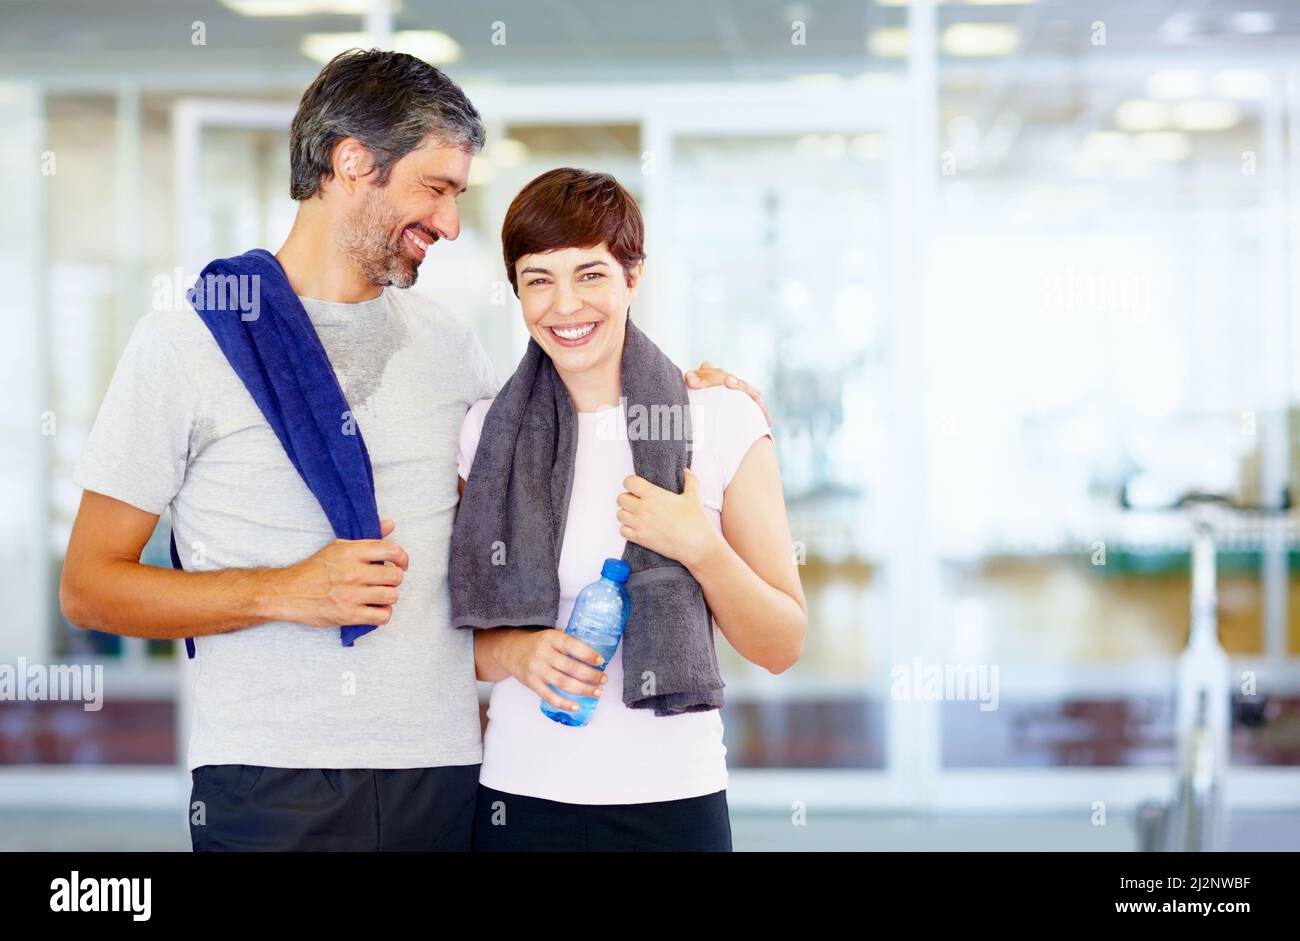 Fitness man and woman at fitness center. Portrait of fitness couple with arms around at gym. Stock Photo